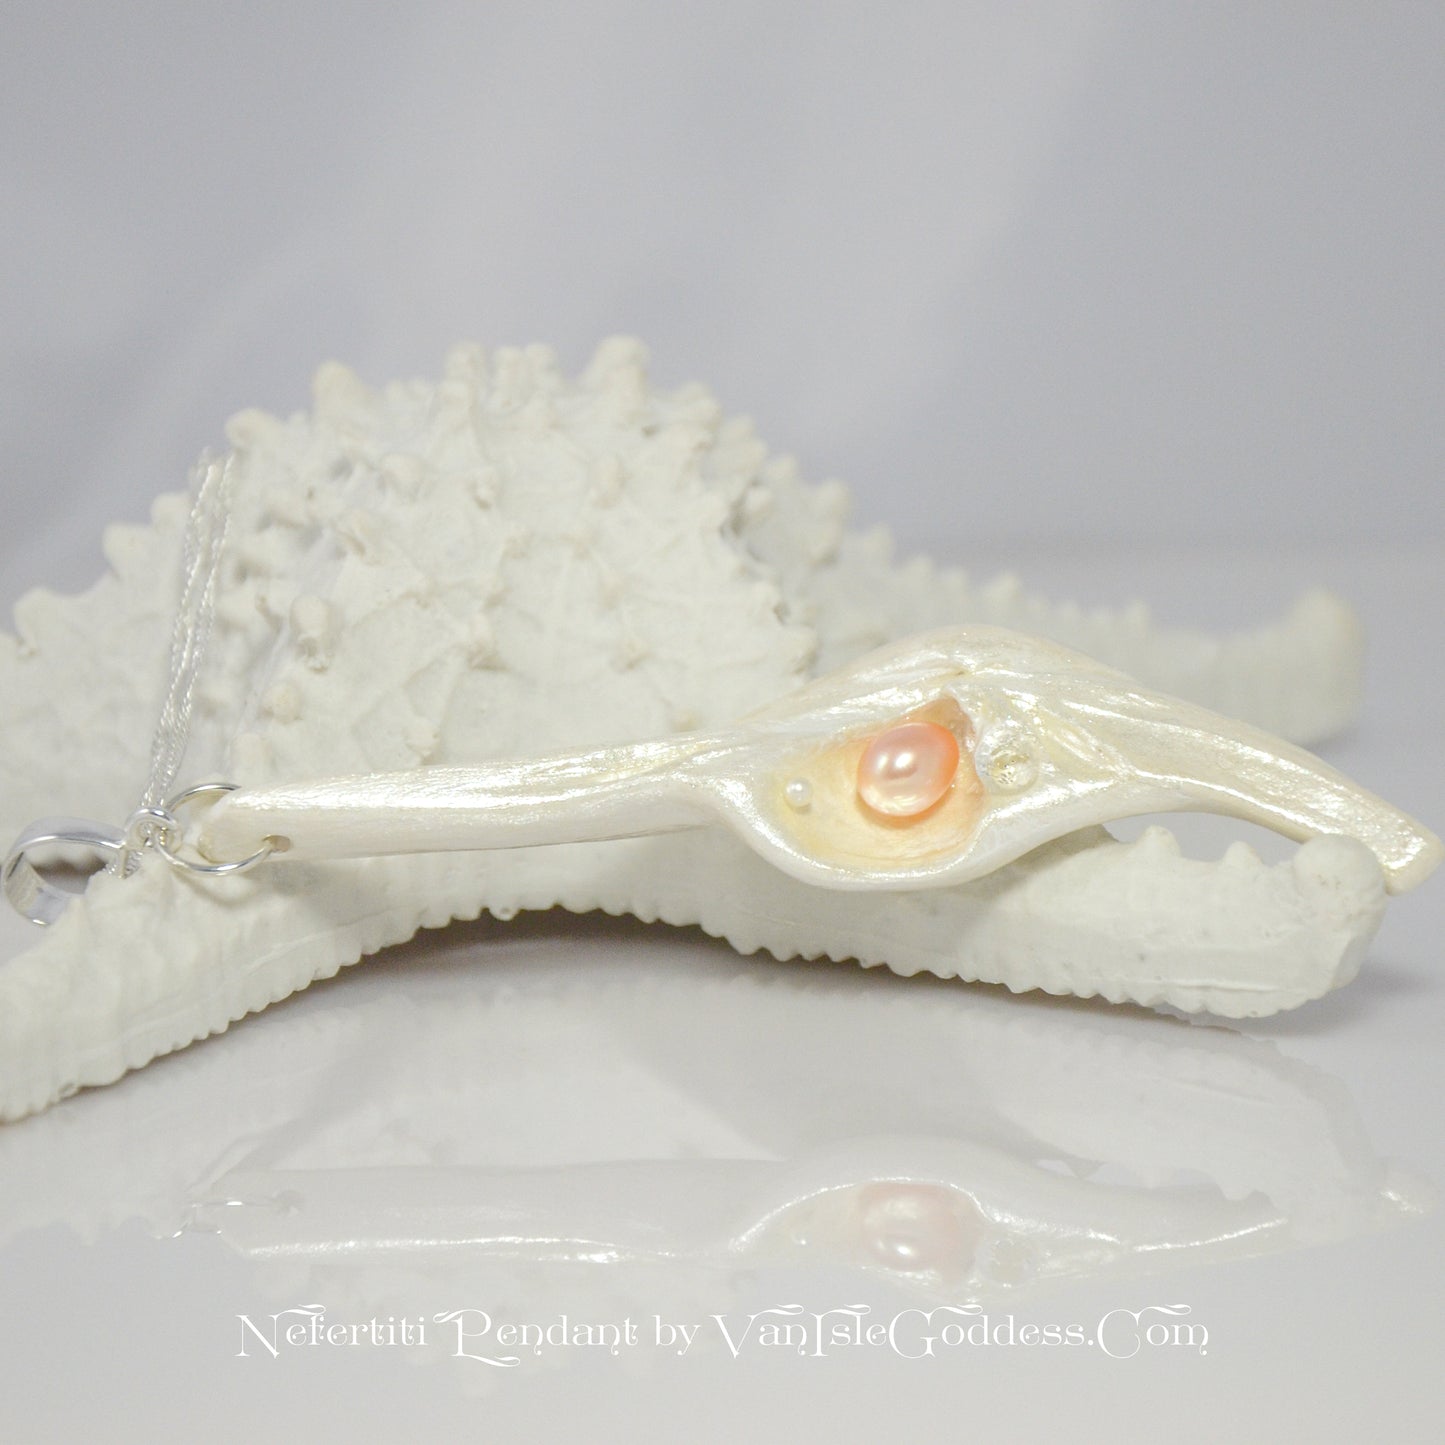 Nefertiti natural seashell and a real 8 mm pink freshwater Pearl, a baby pearl and a 5mm faceted Herkimer diamond compliments the pendant. The pendant rests on a starfish.  The words on the bottom read Nefertiti Pendant by Van Isle Goddess dot com